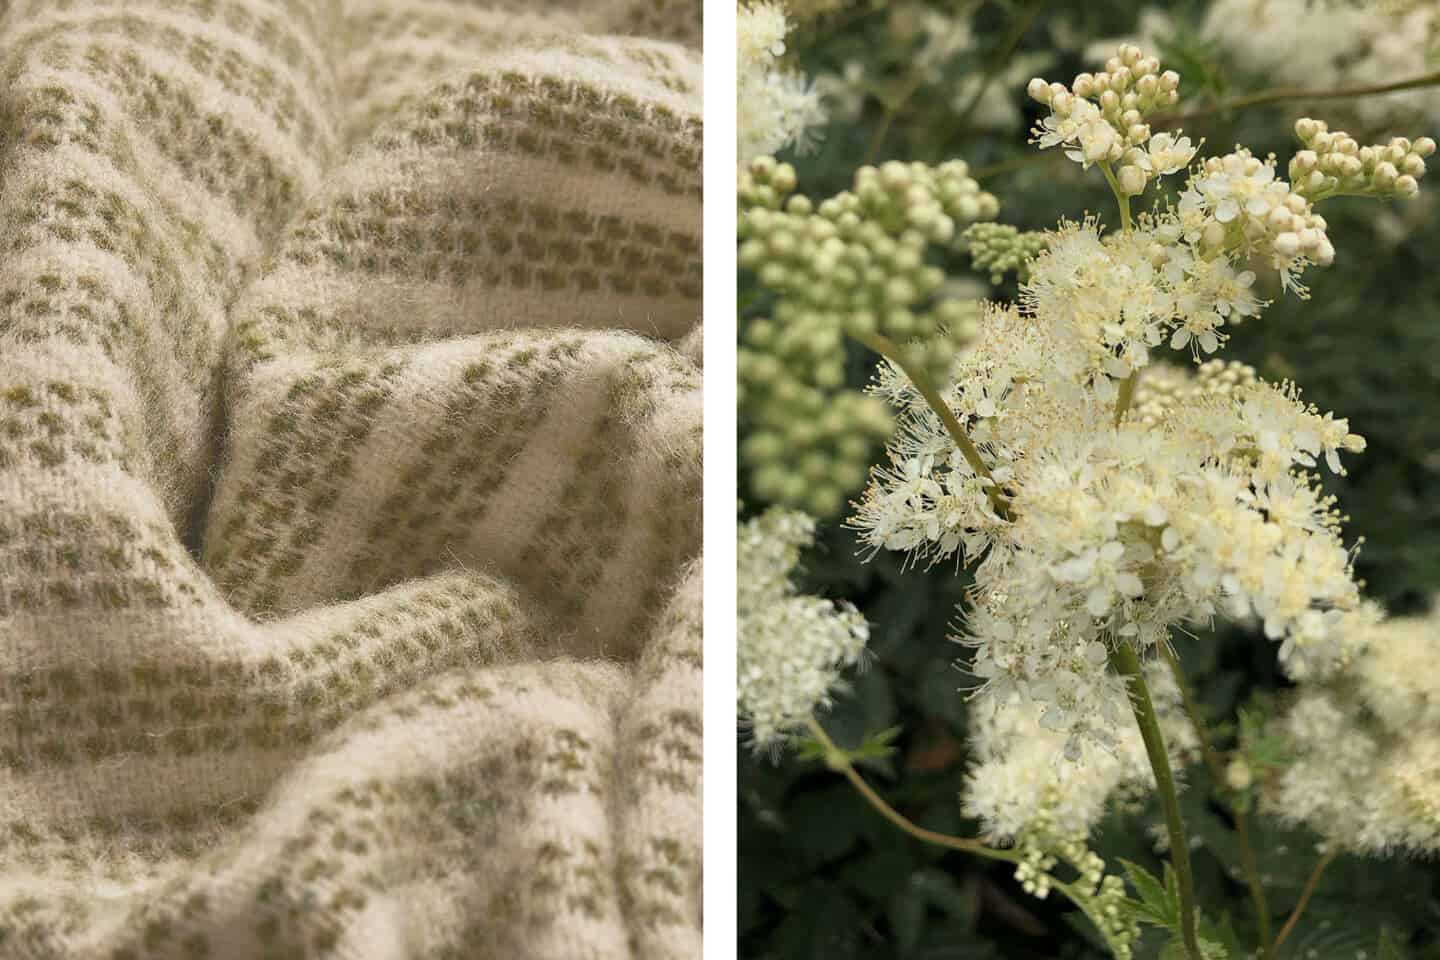 A photo of a blanket next to a photo of flowers showing how a nature can inspire home decor choices